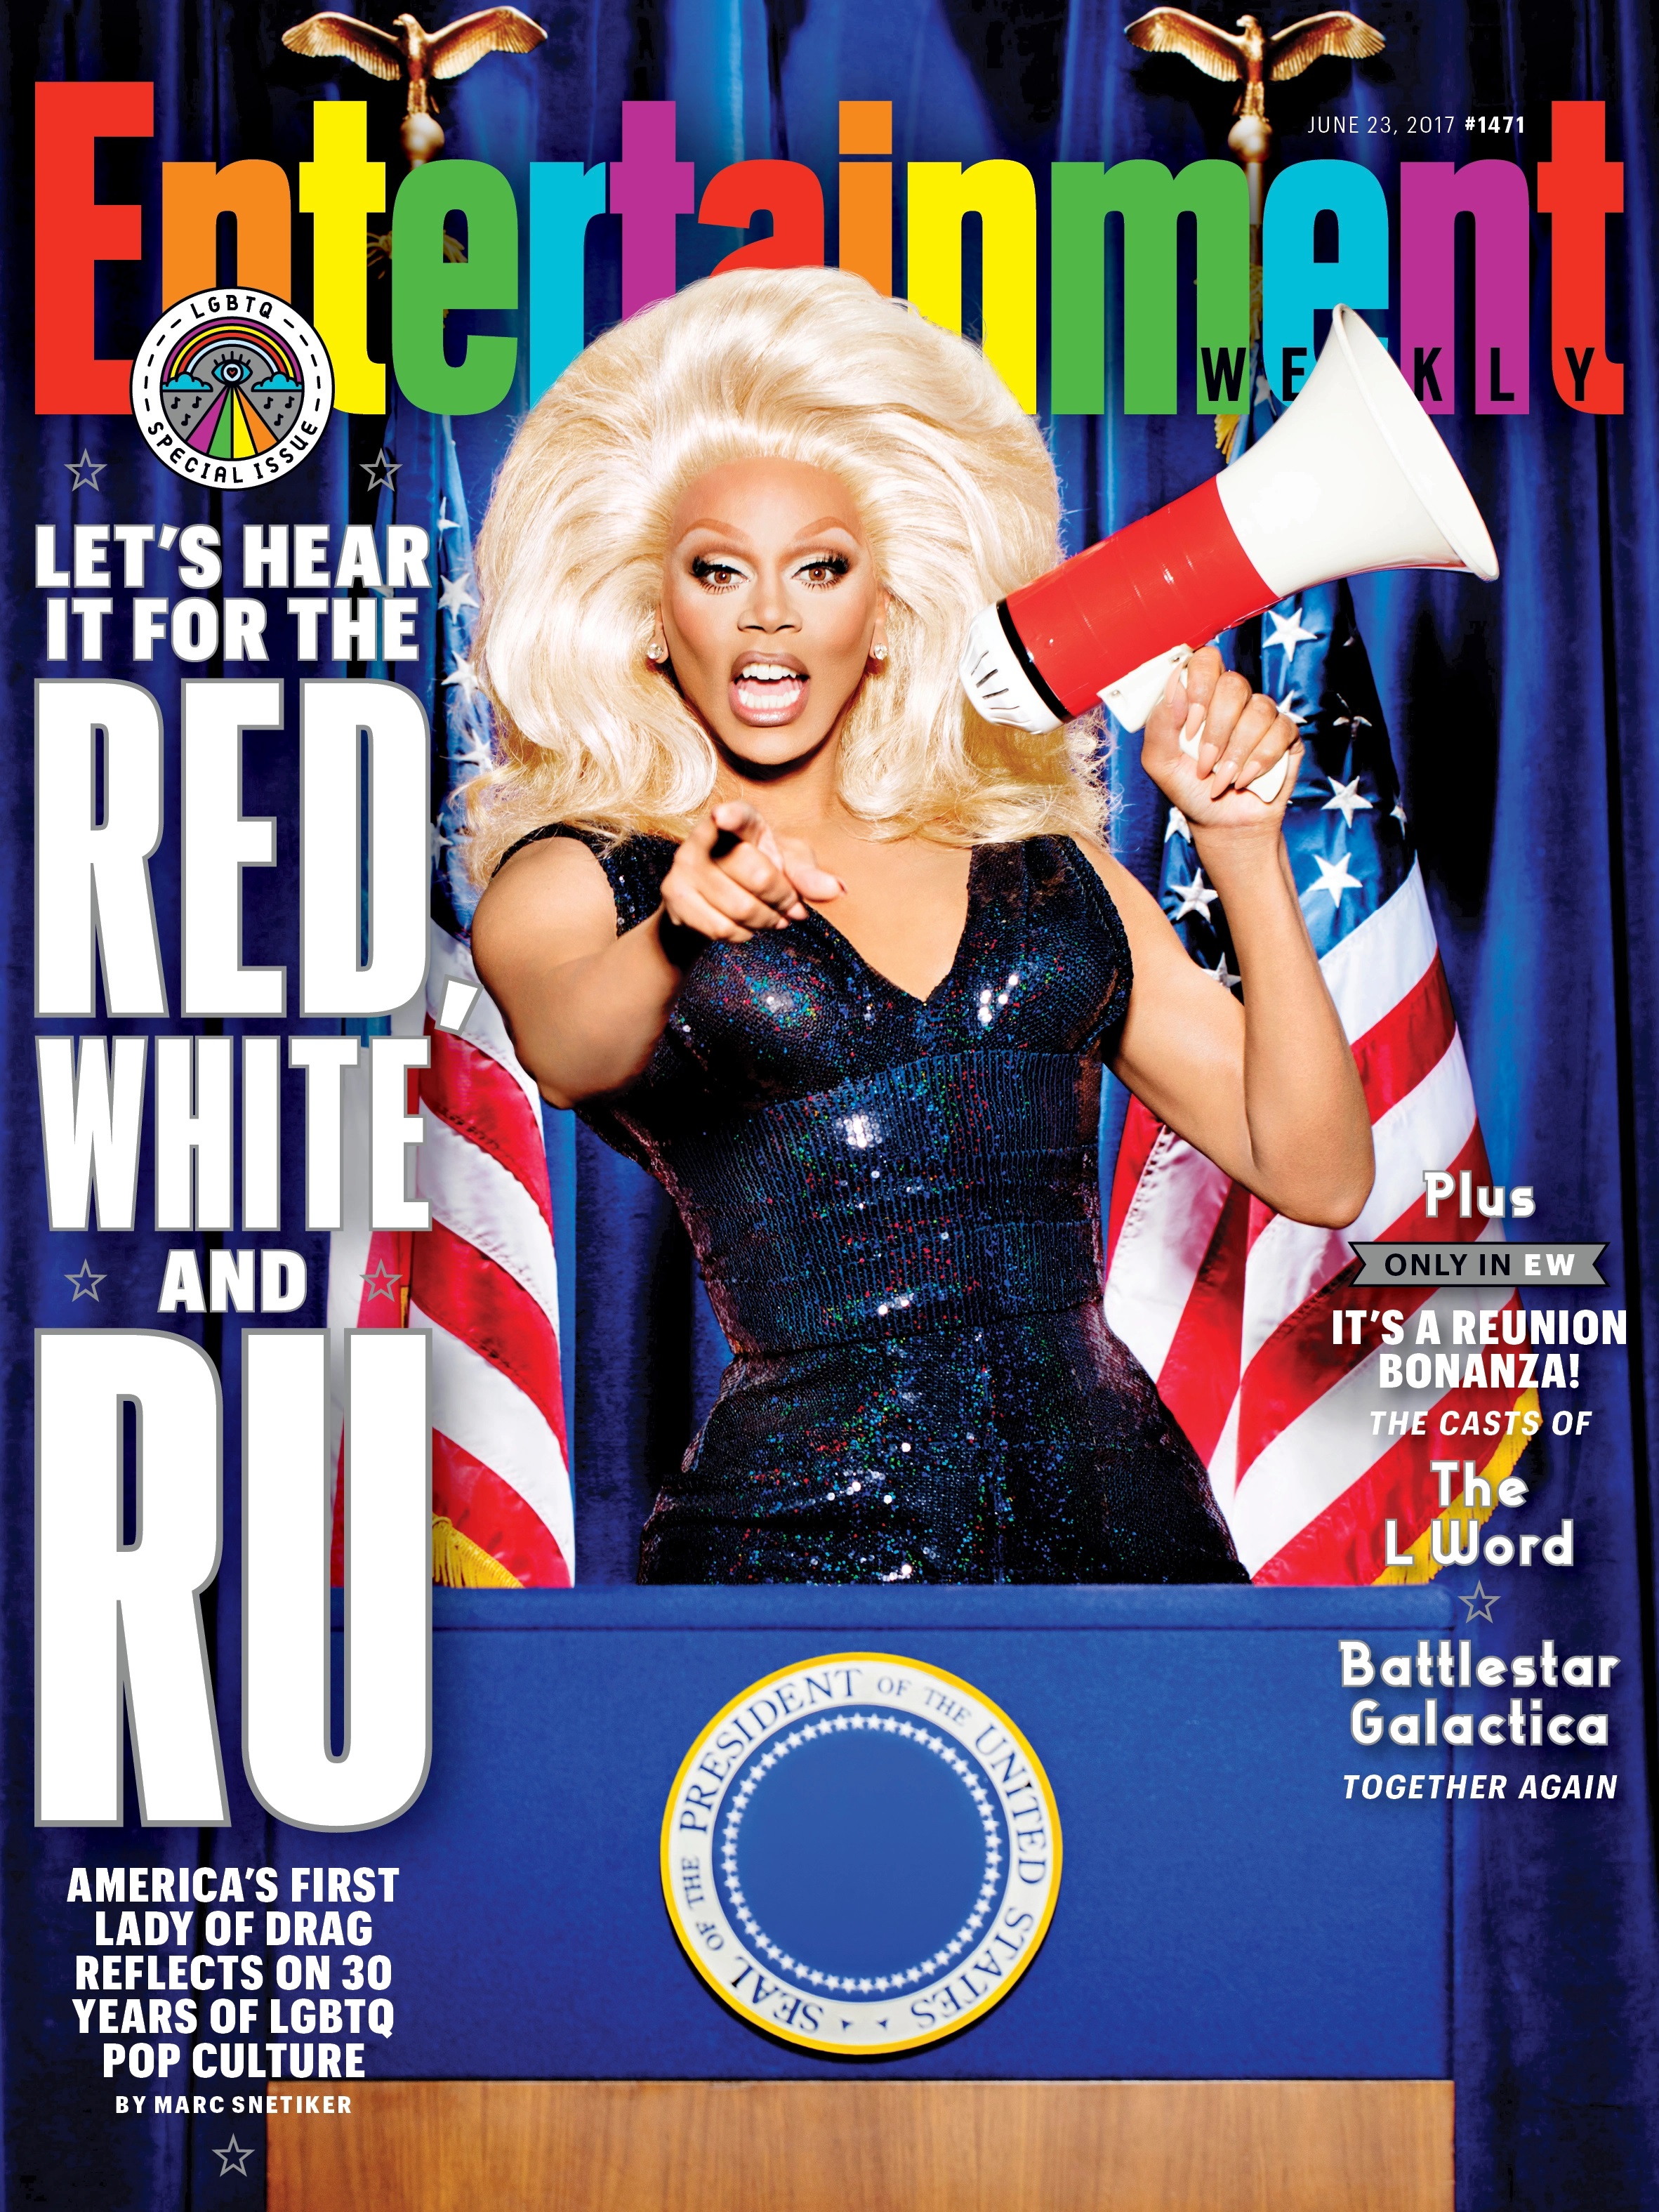 Entertainment Weekly - “Let’s Hear It for the Red, White and Ru," June 23, 2017